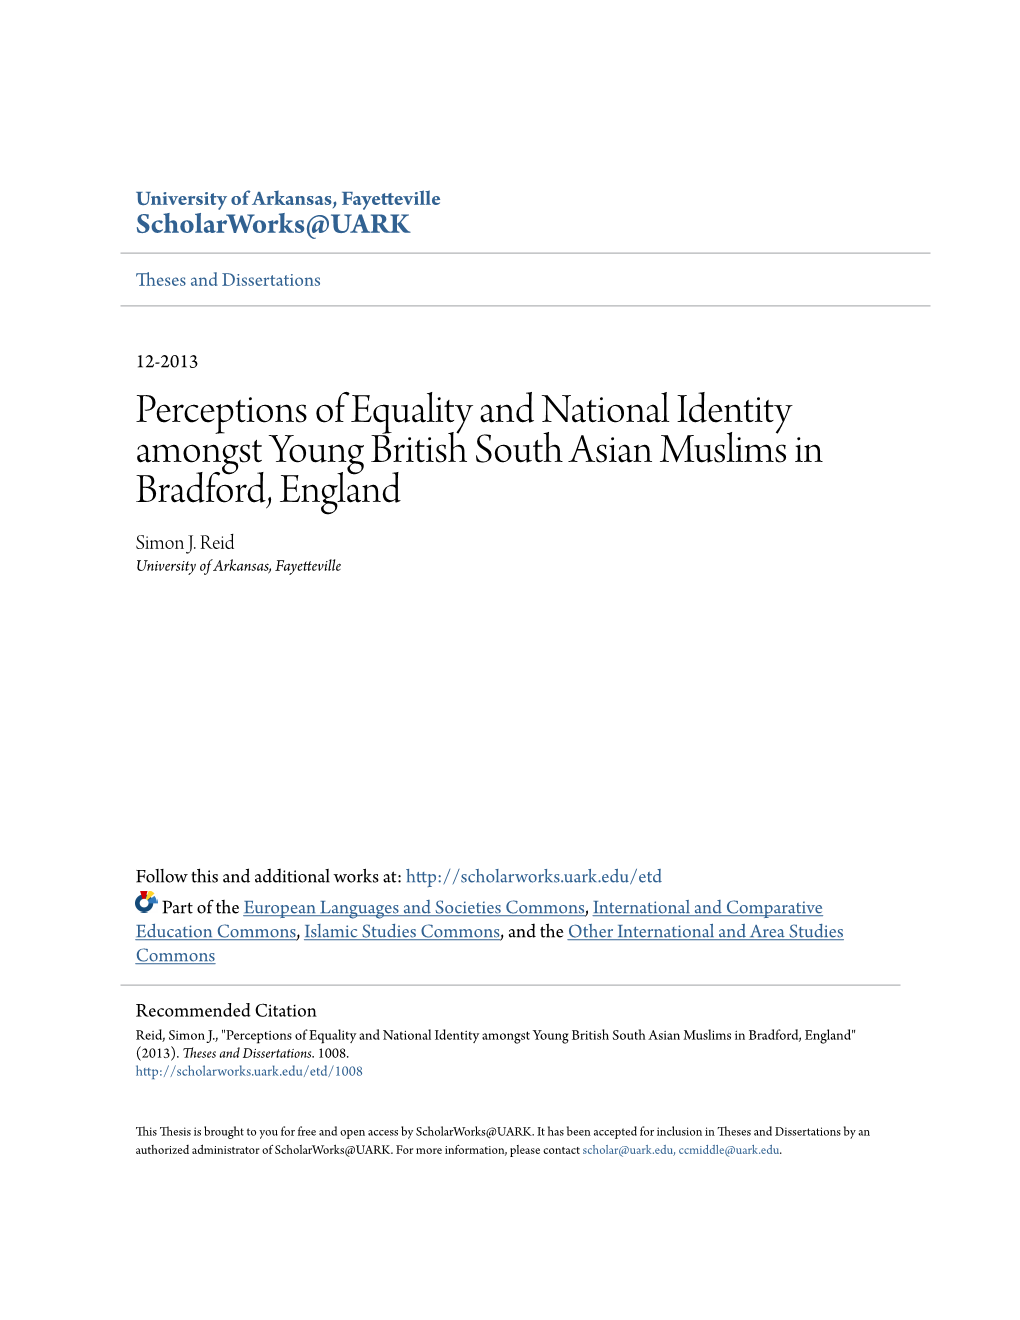 Perceptions of Equality and National Identity Amongst Young British South Asian Muslims in Bradford, England Simon J